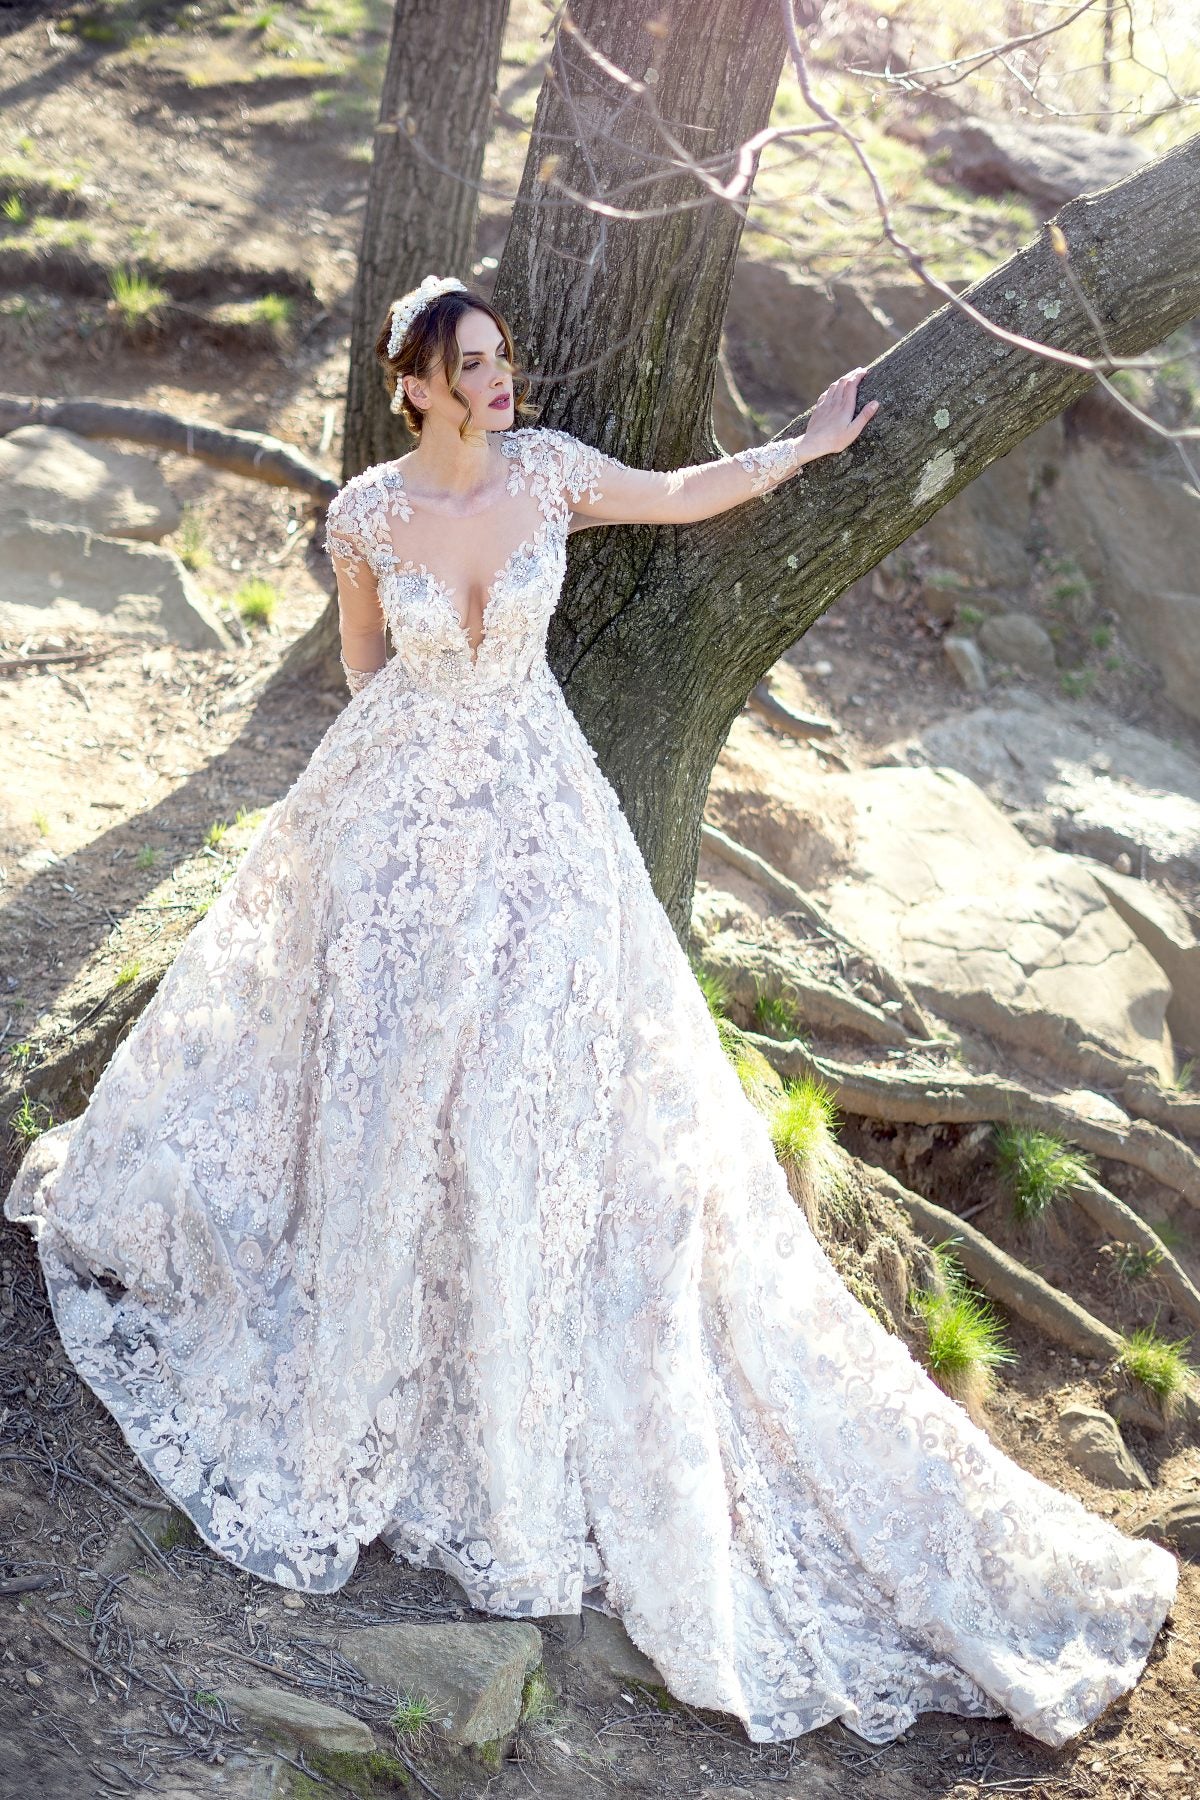 ysa-makino-romantic-long-sleeve-beaded-and-embroidered-illusion-ball-gown-wedding-dress-33666967-1200x1800.jpg